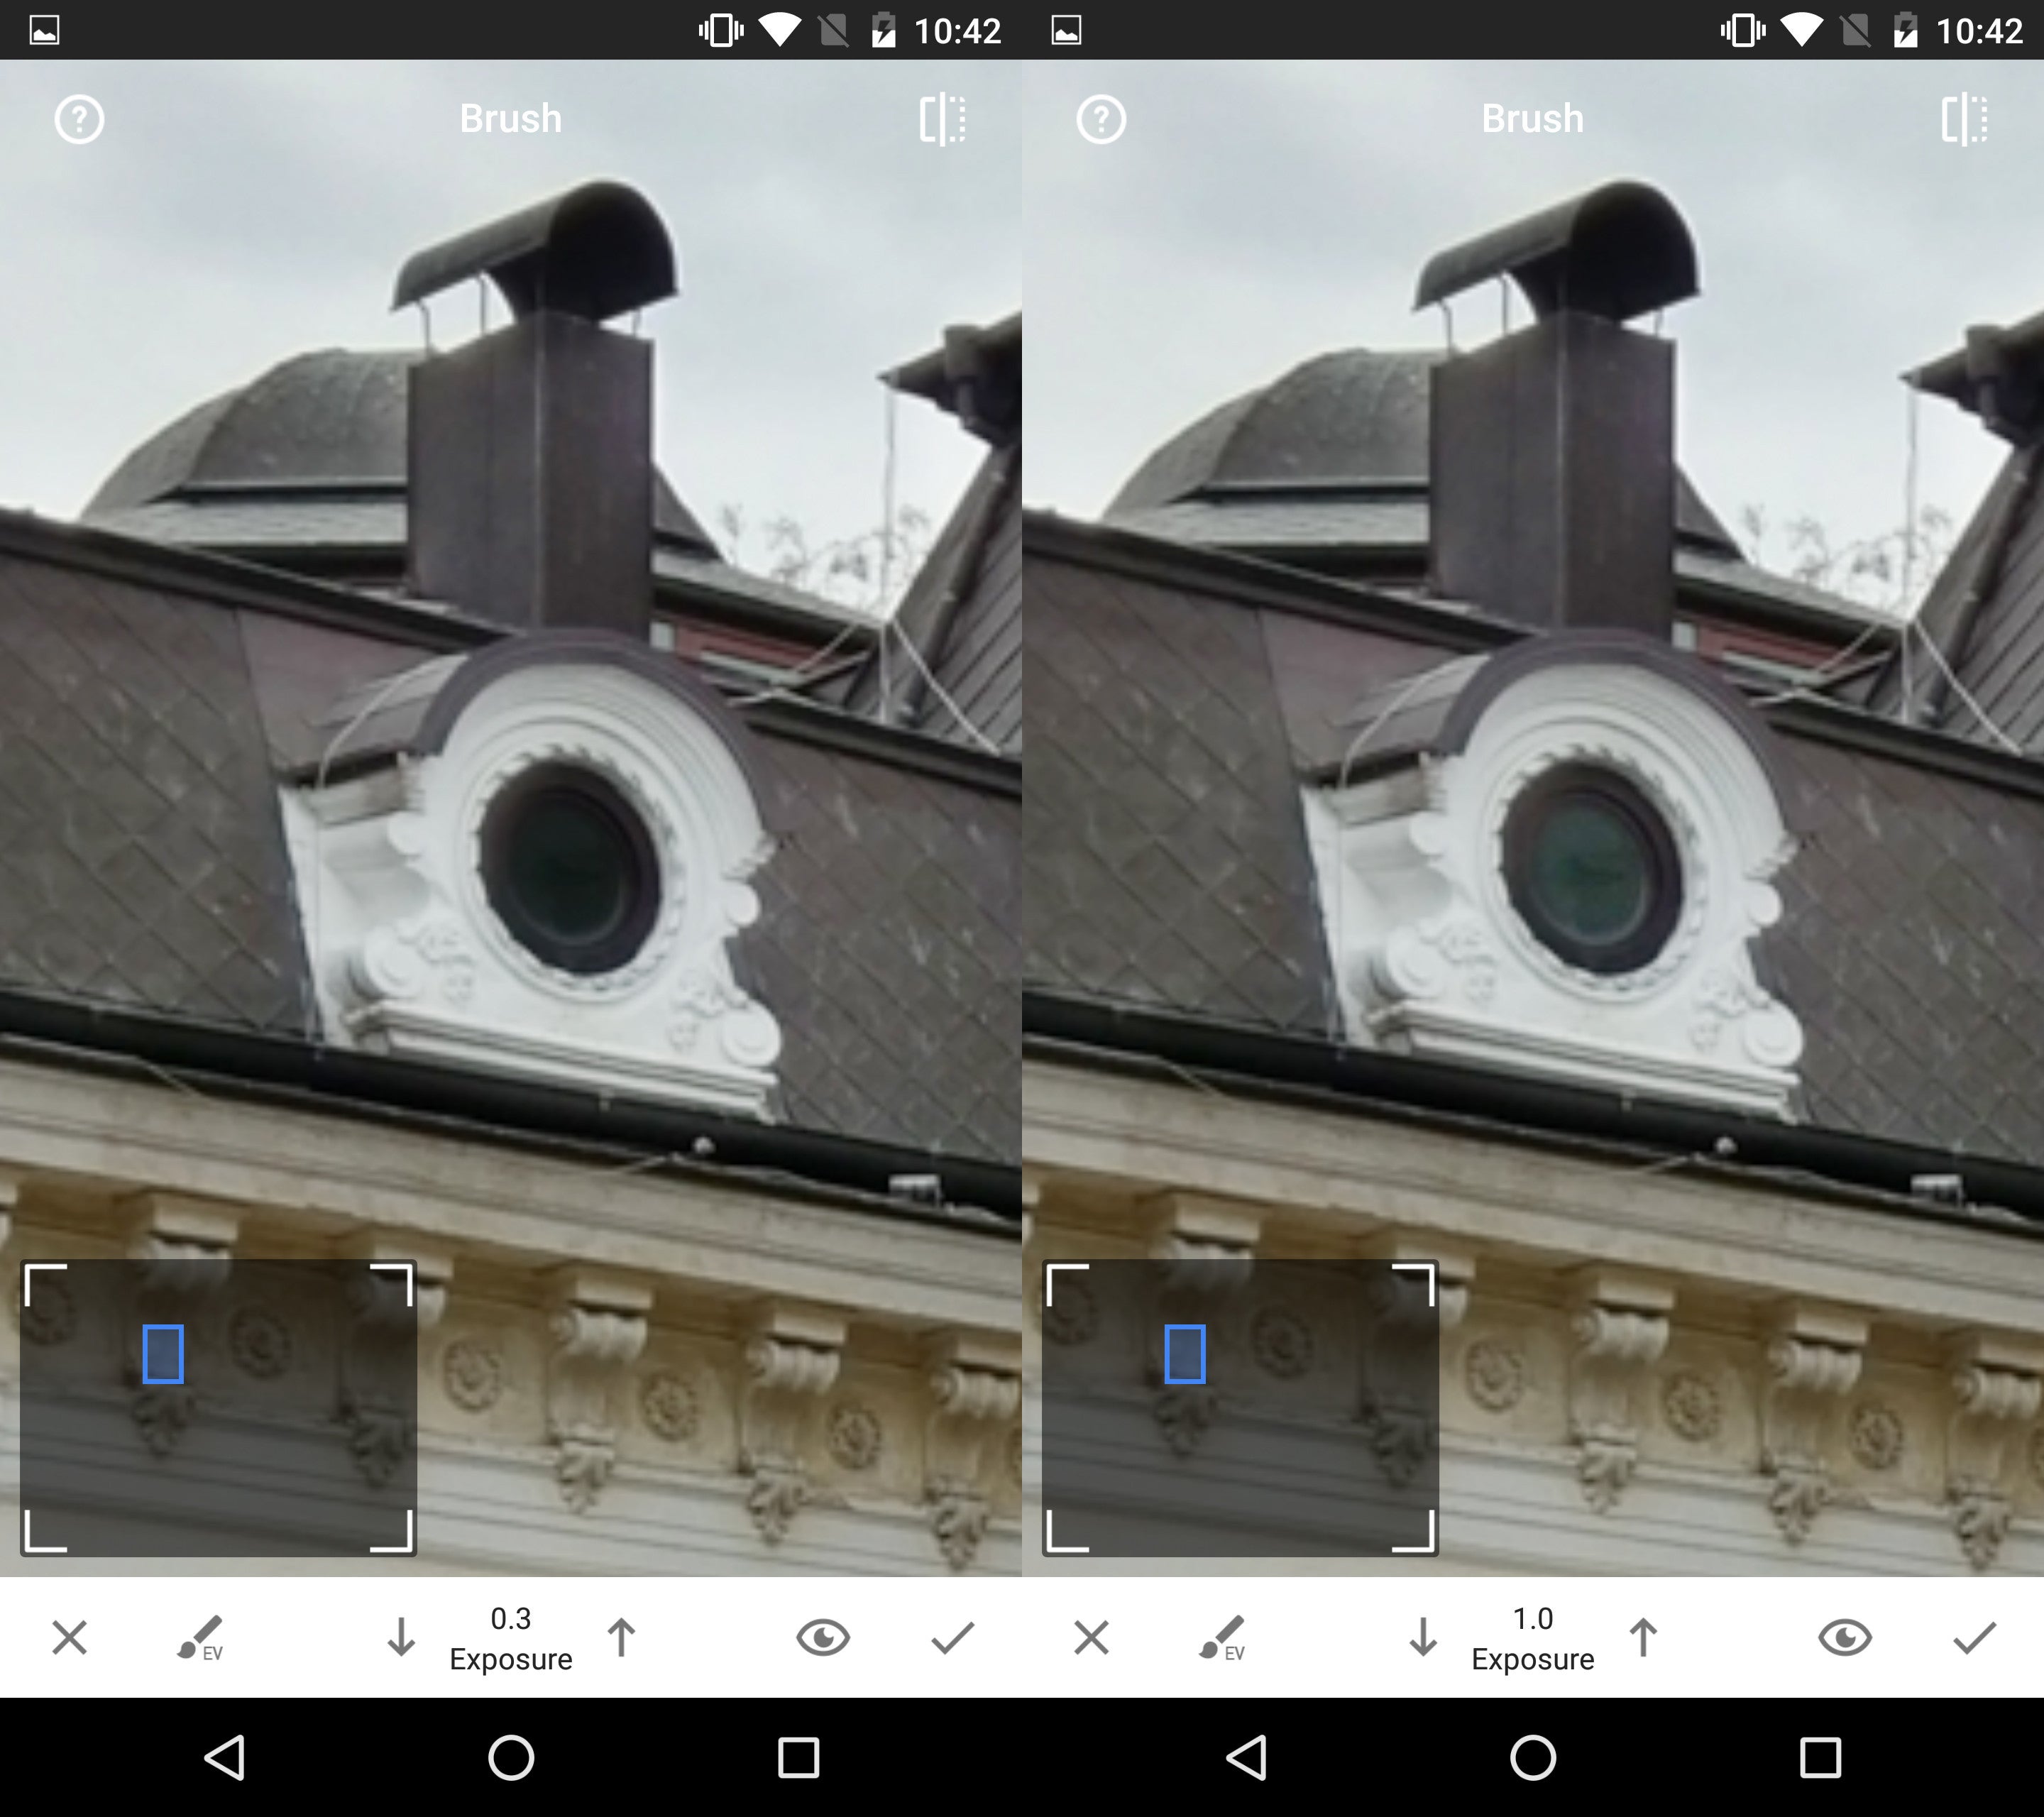 The round roof window with 0.3 steps of exposure vs. 1 full step of exposure - How to edit photos like a pro using only Snapseed